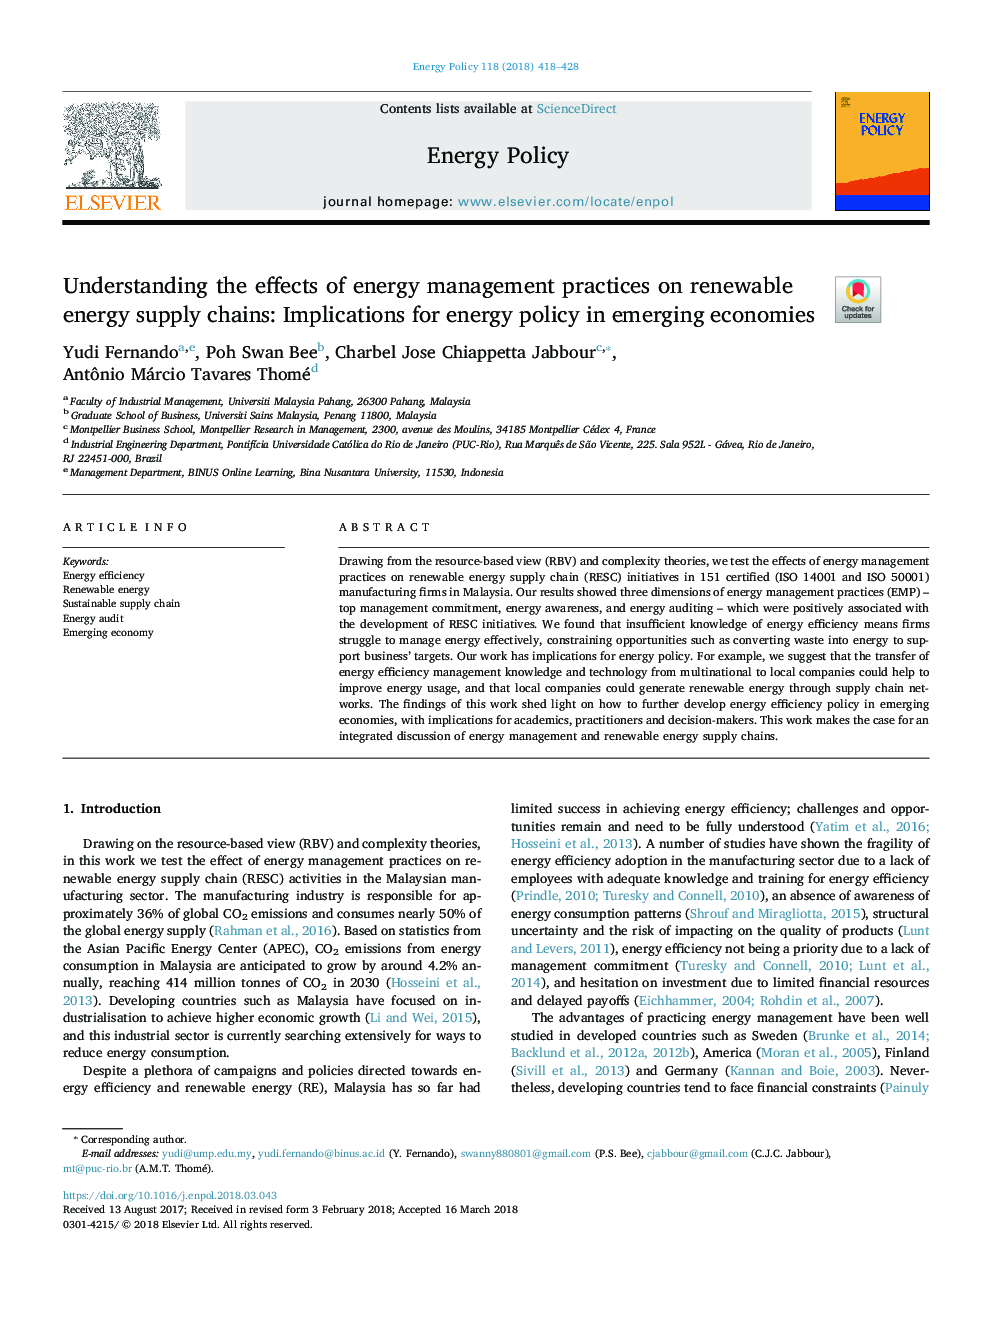 Understanding the effects of energy management practices on renewable energy supply chains: Implications for energy policy in emerging economies